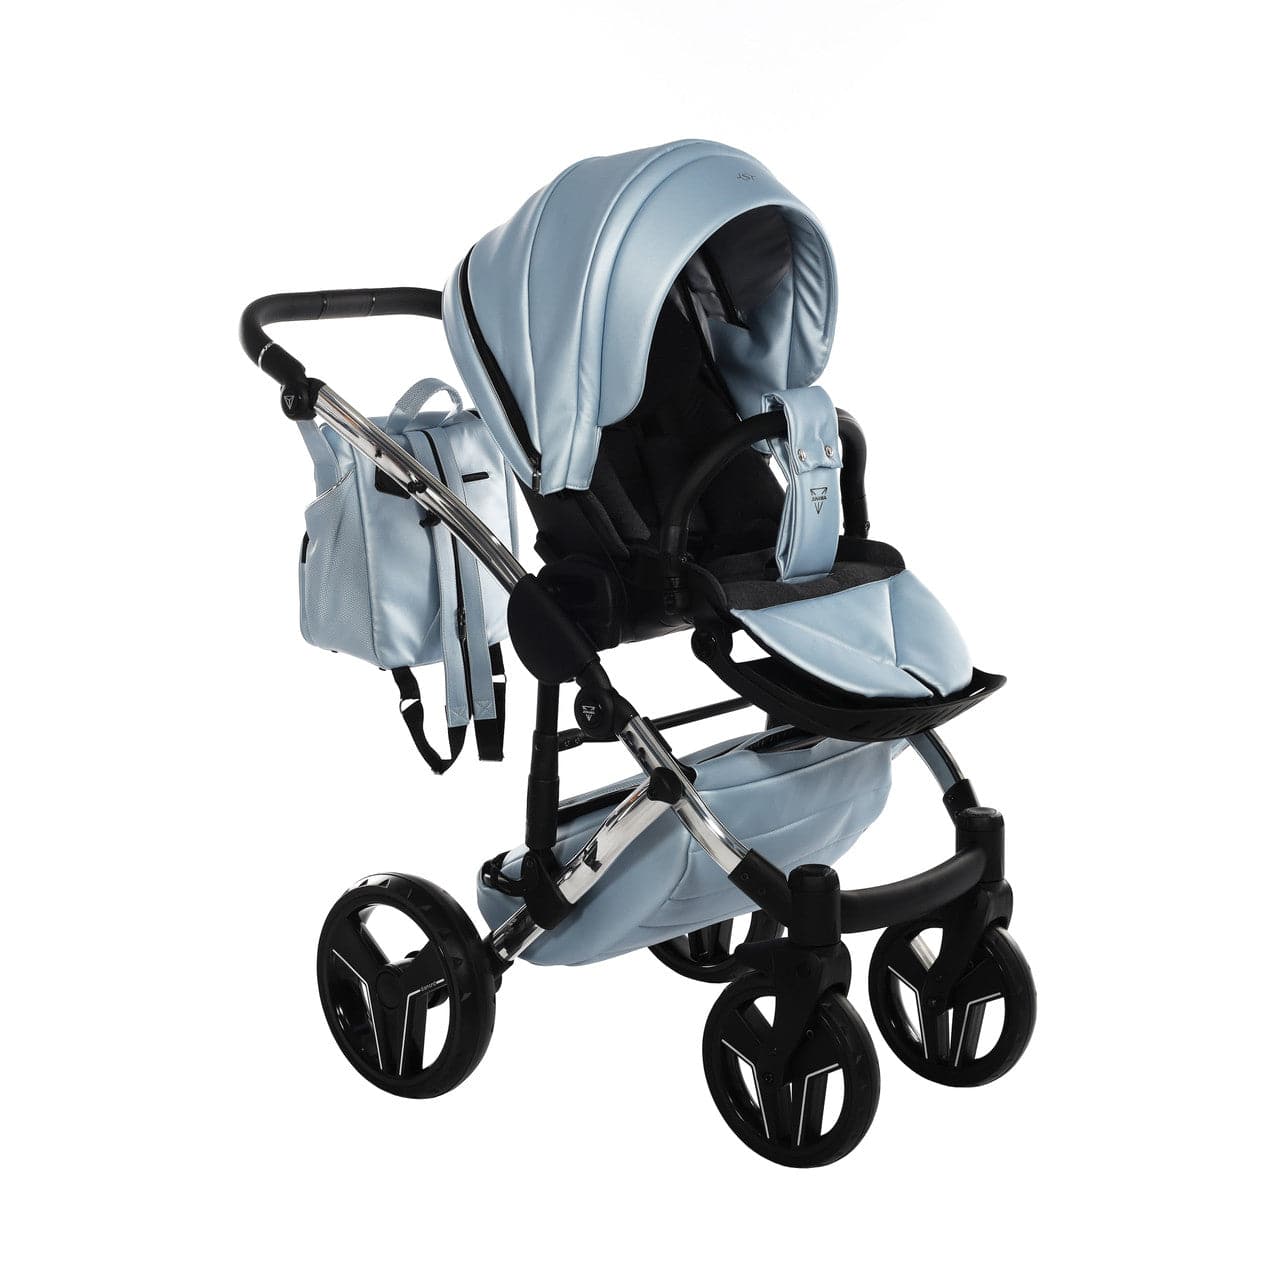 Junama S-Class 2 In 1 Pram - Sky Blue - For Your Little One